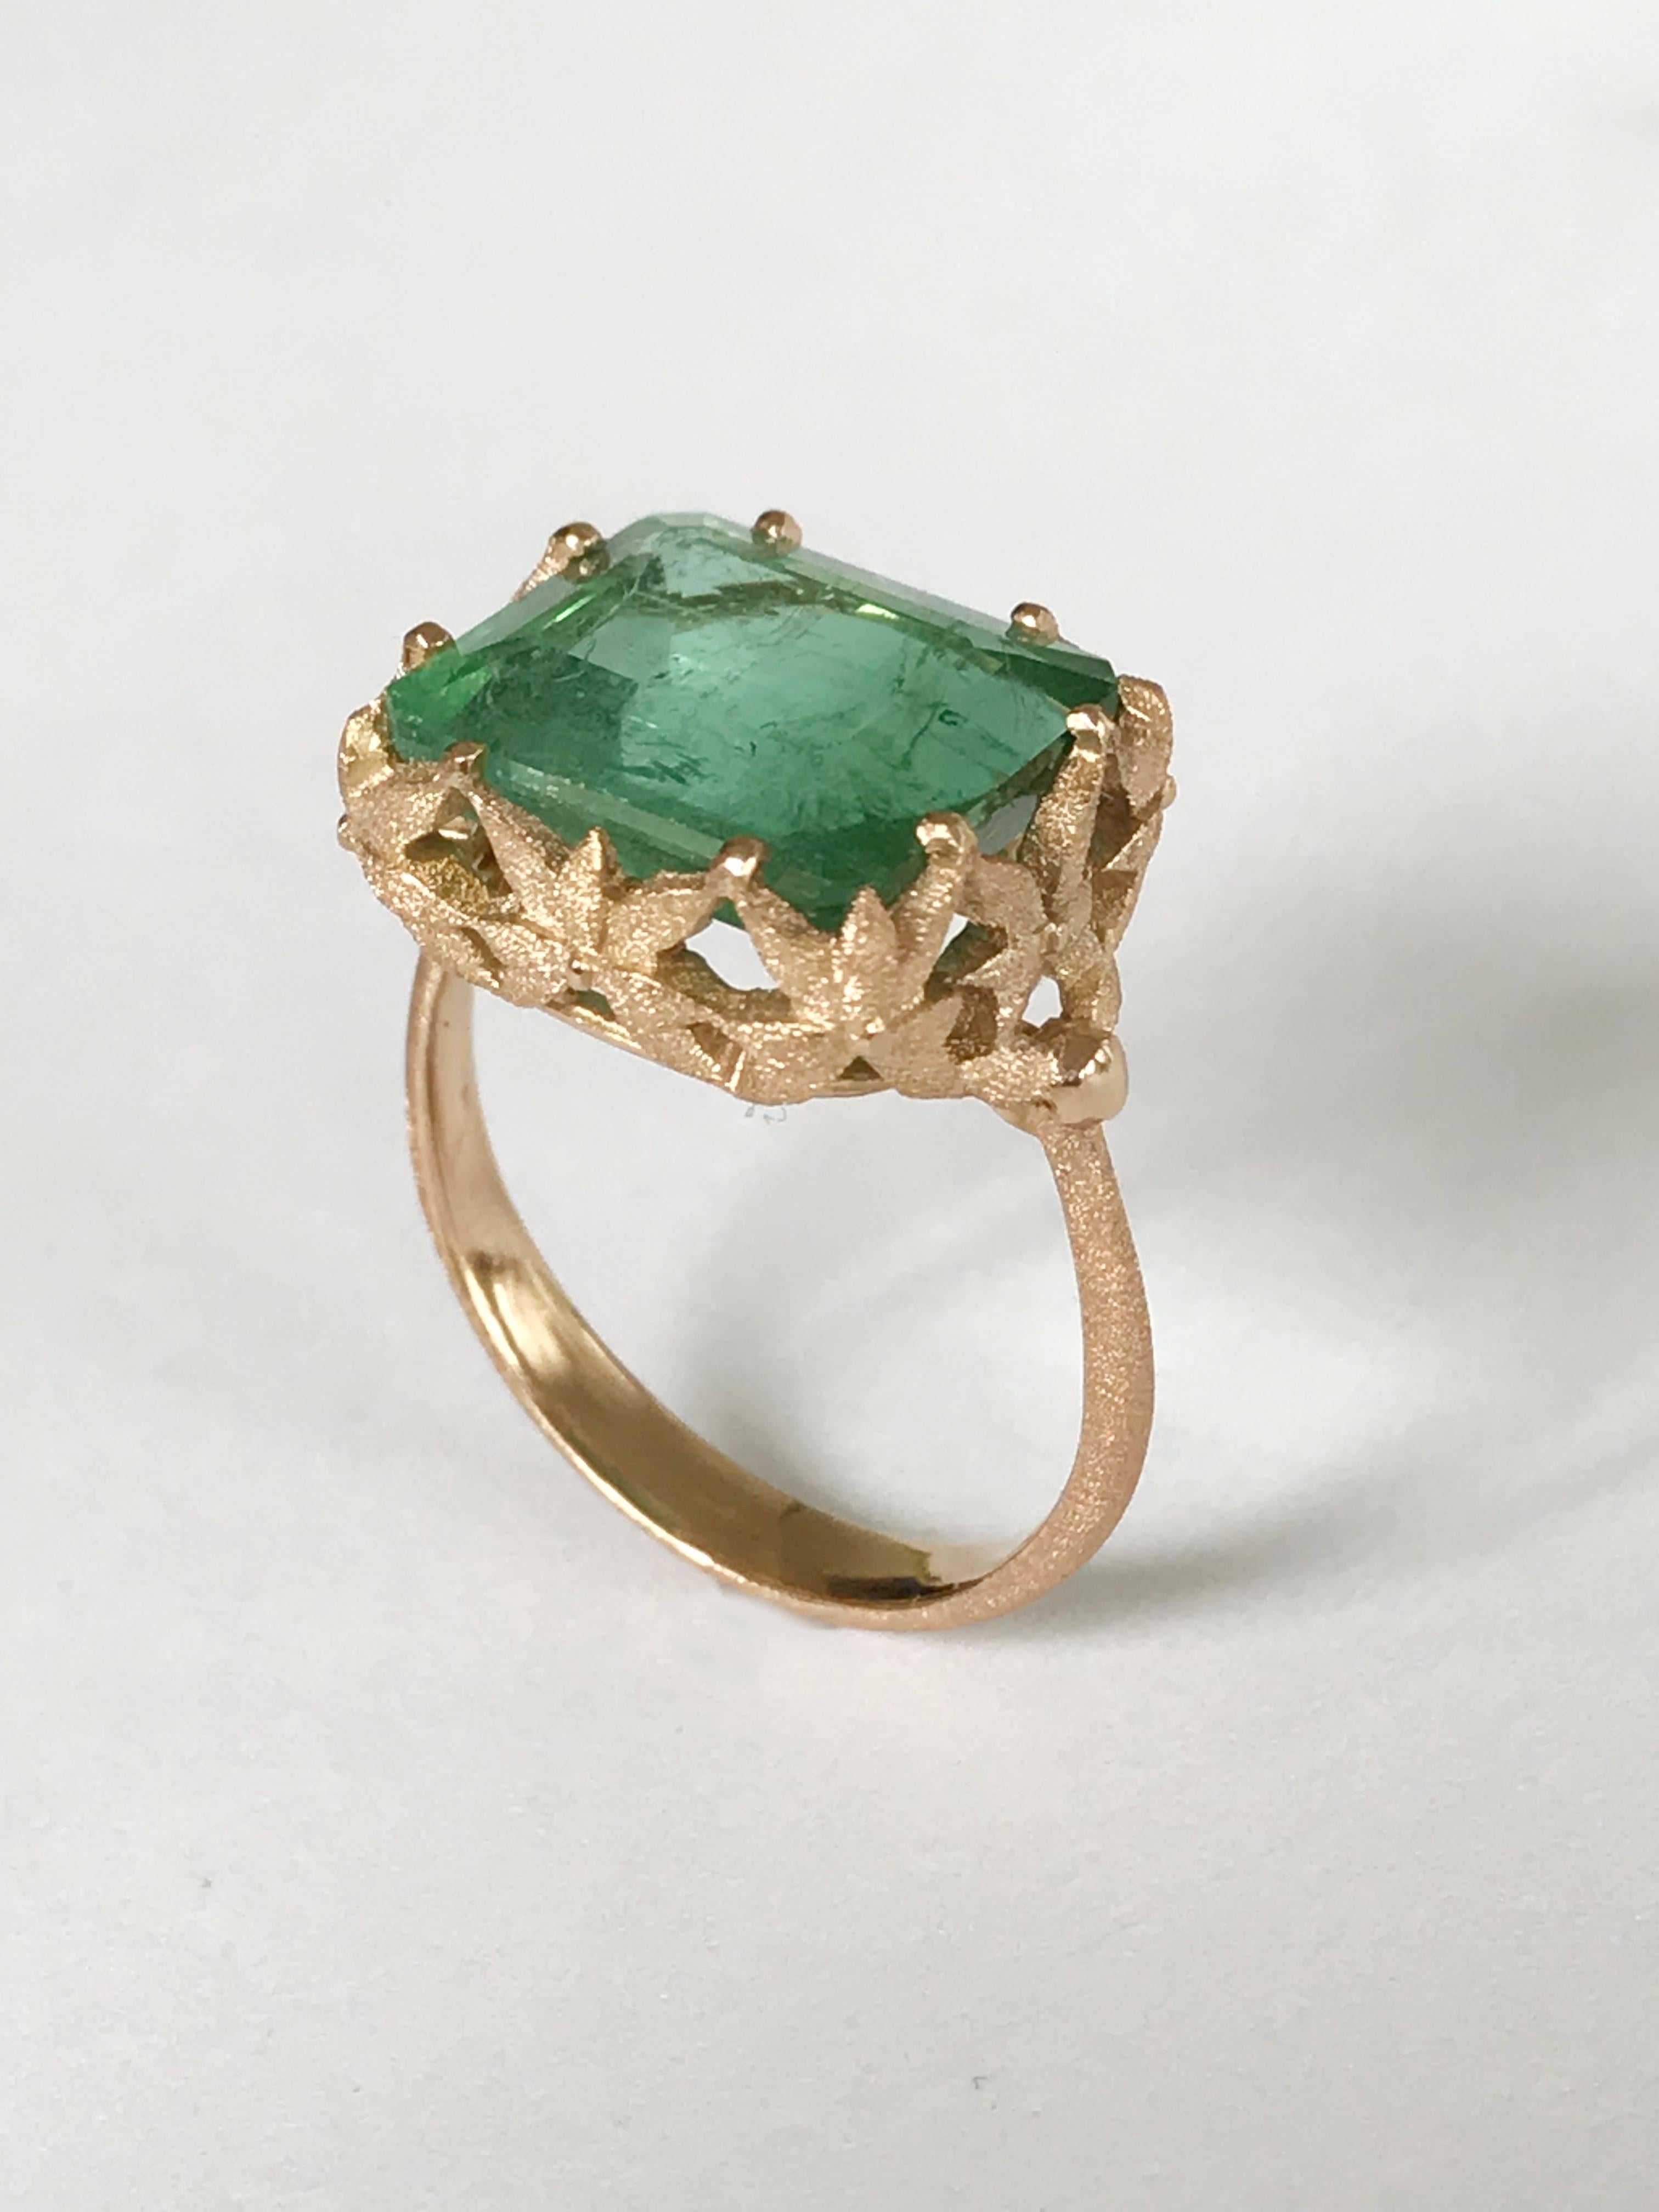 Dalben Green Tourmaline Rose Gold Cocktail Ring In New Condition For Sale In Como, IT